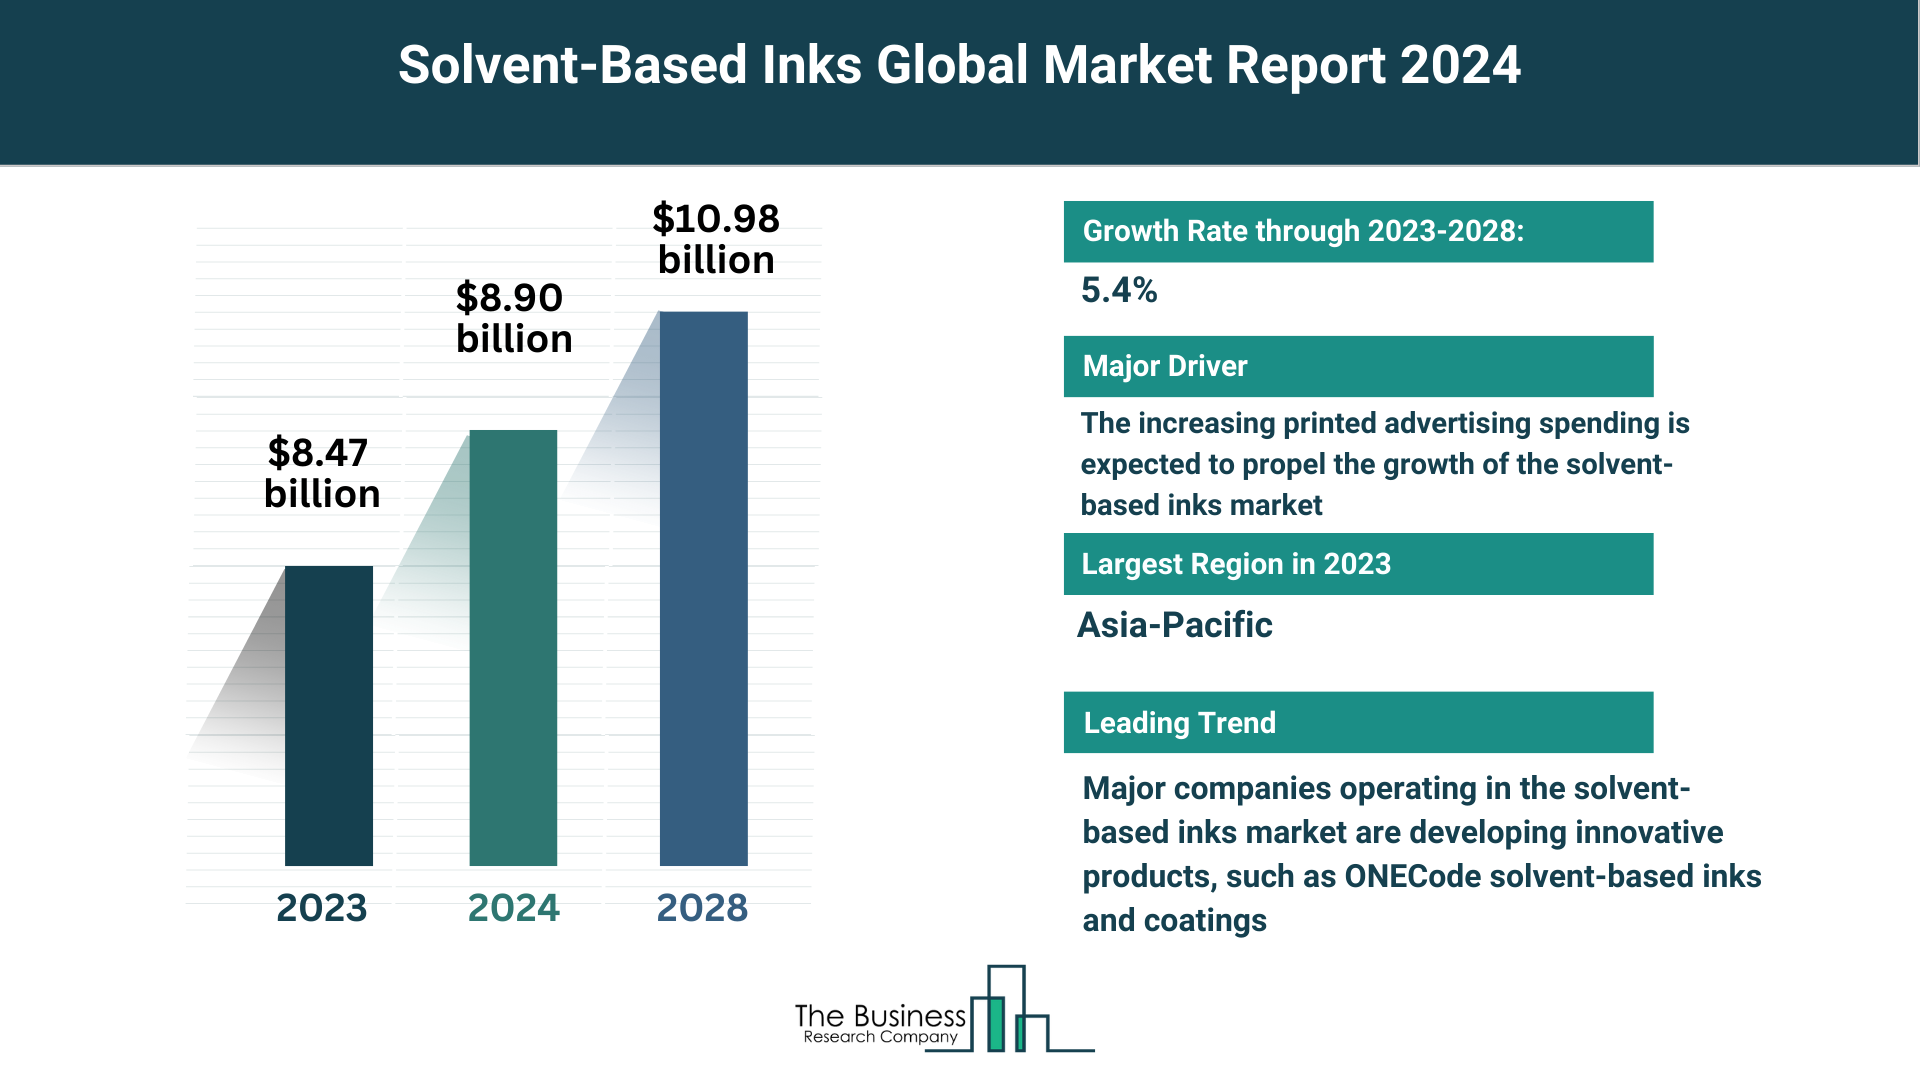 Global Solvent-Based Inks Market Analysis: Size, Drivers, Trends, Opportunities And Strategies